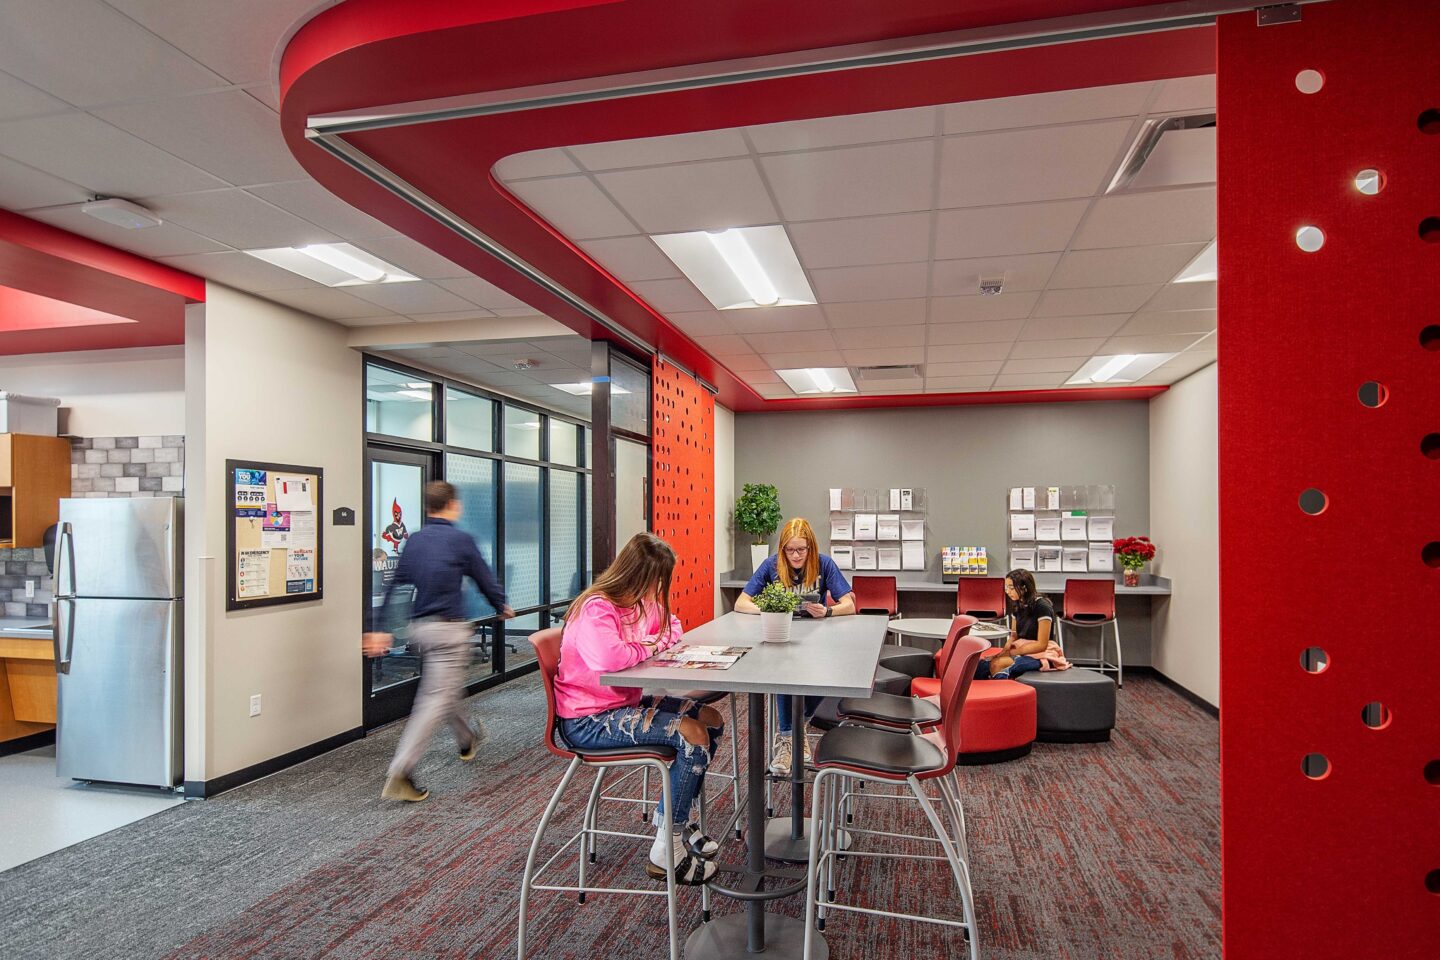 An open lounge area in student services features flexible furniture and school colors at Waukesha South High School